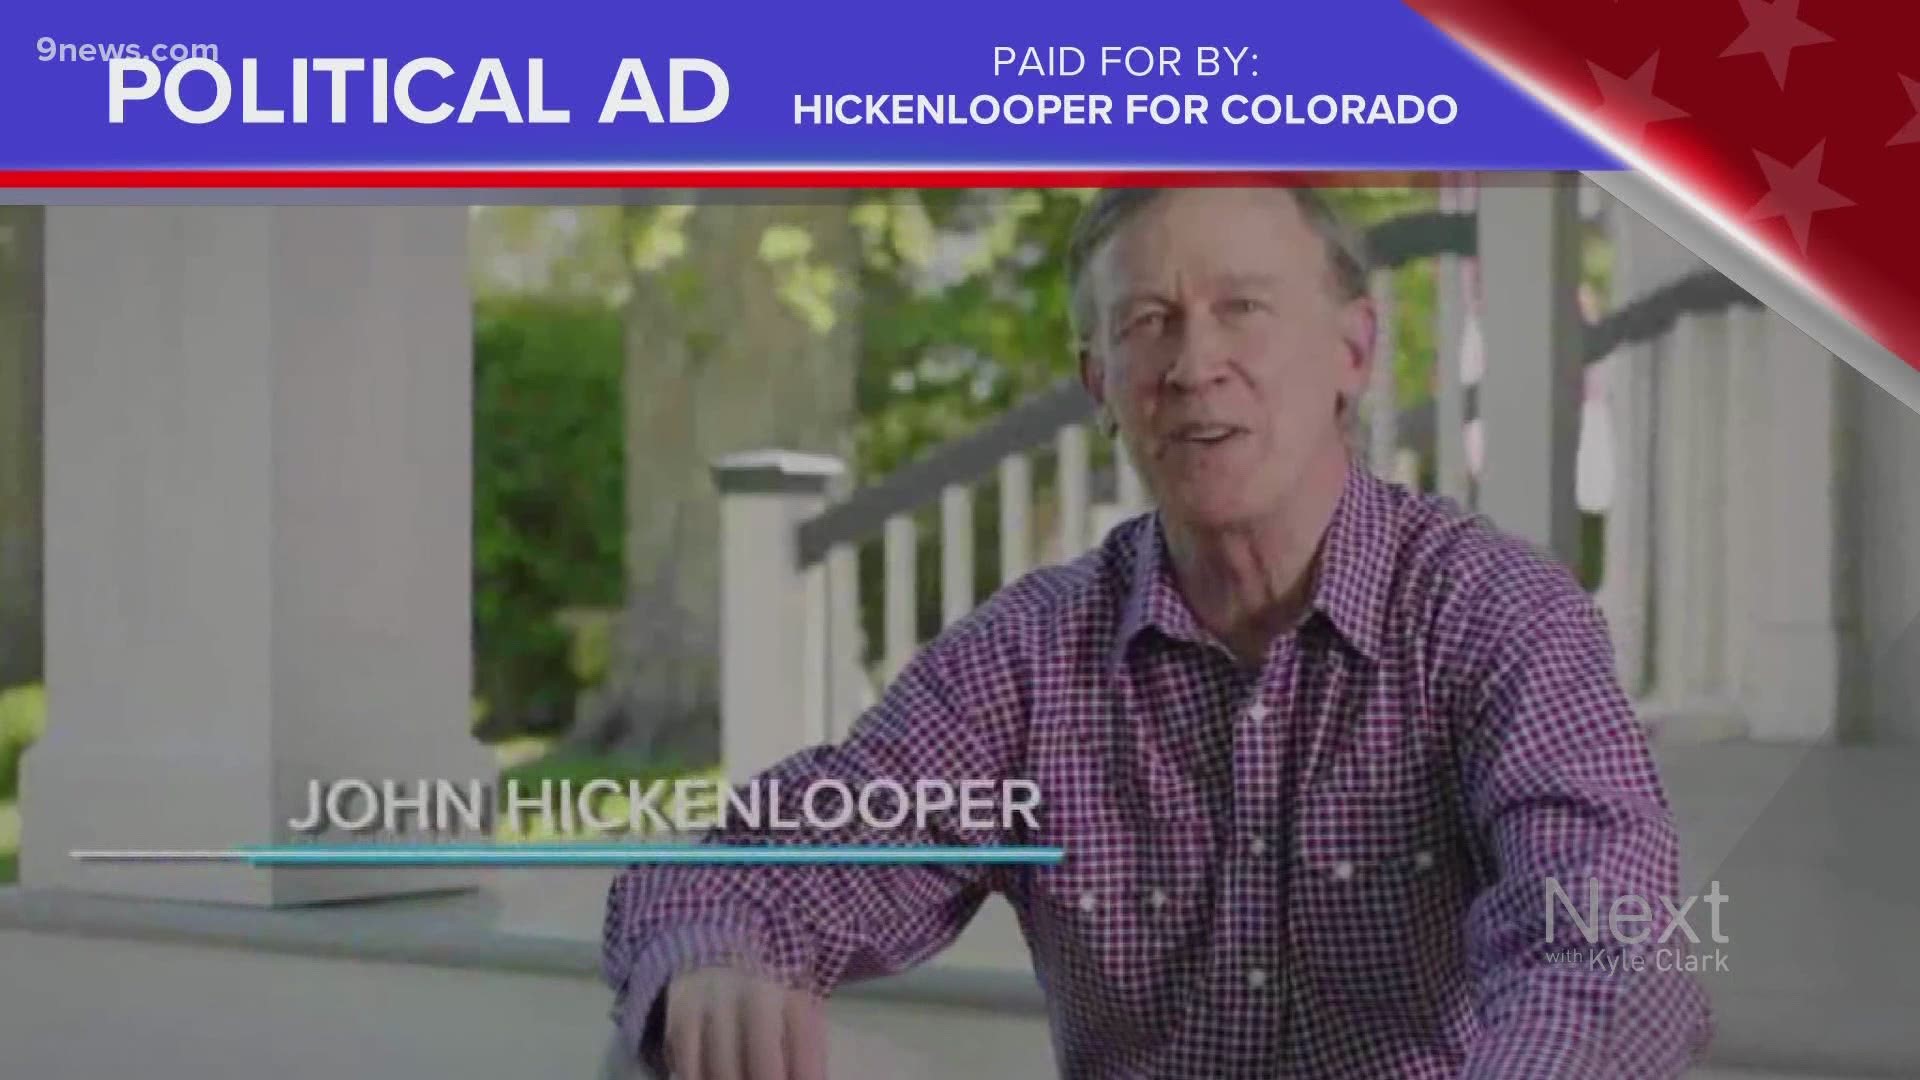 Former Gov. Hickenlooper makes claims about Colorado's economy as he campaigns for the U.S. Senate seat held by Cory Gardner.